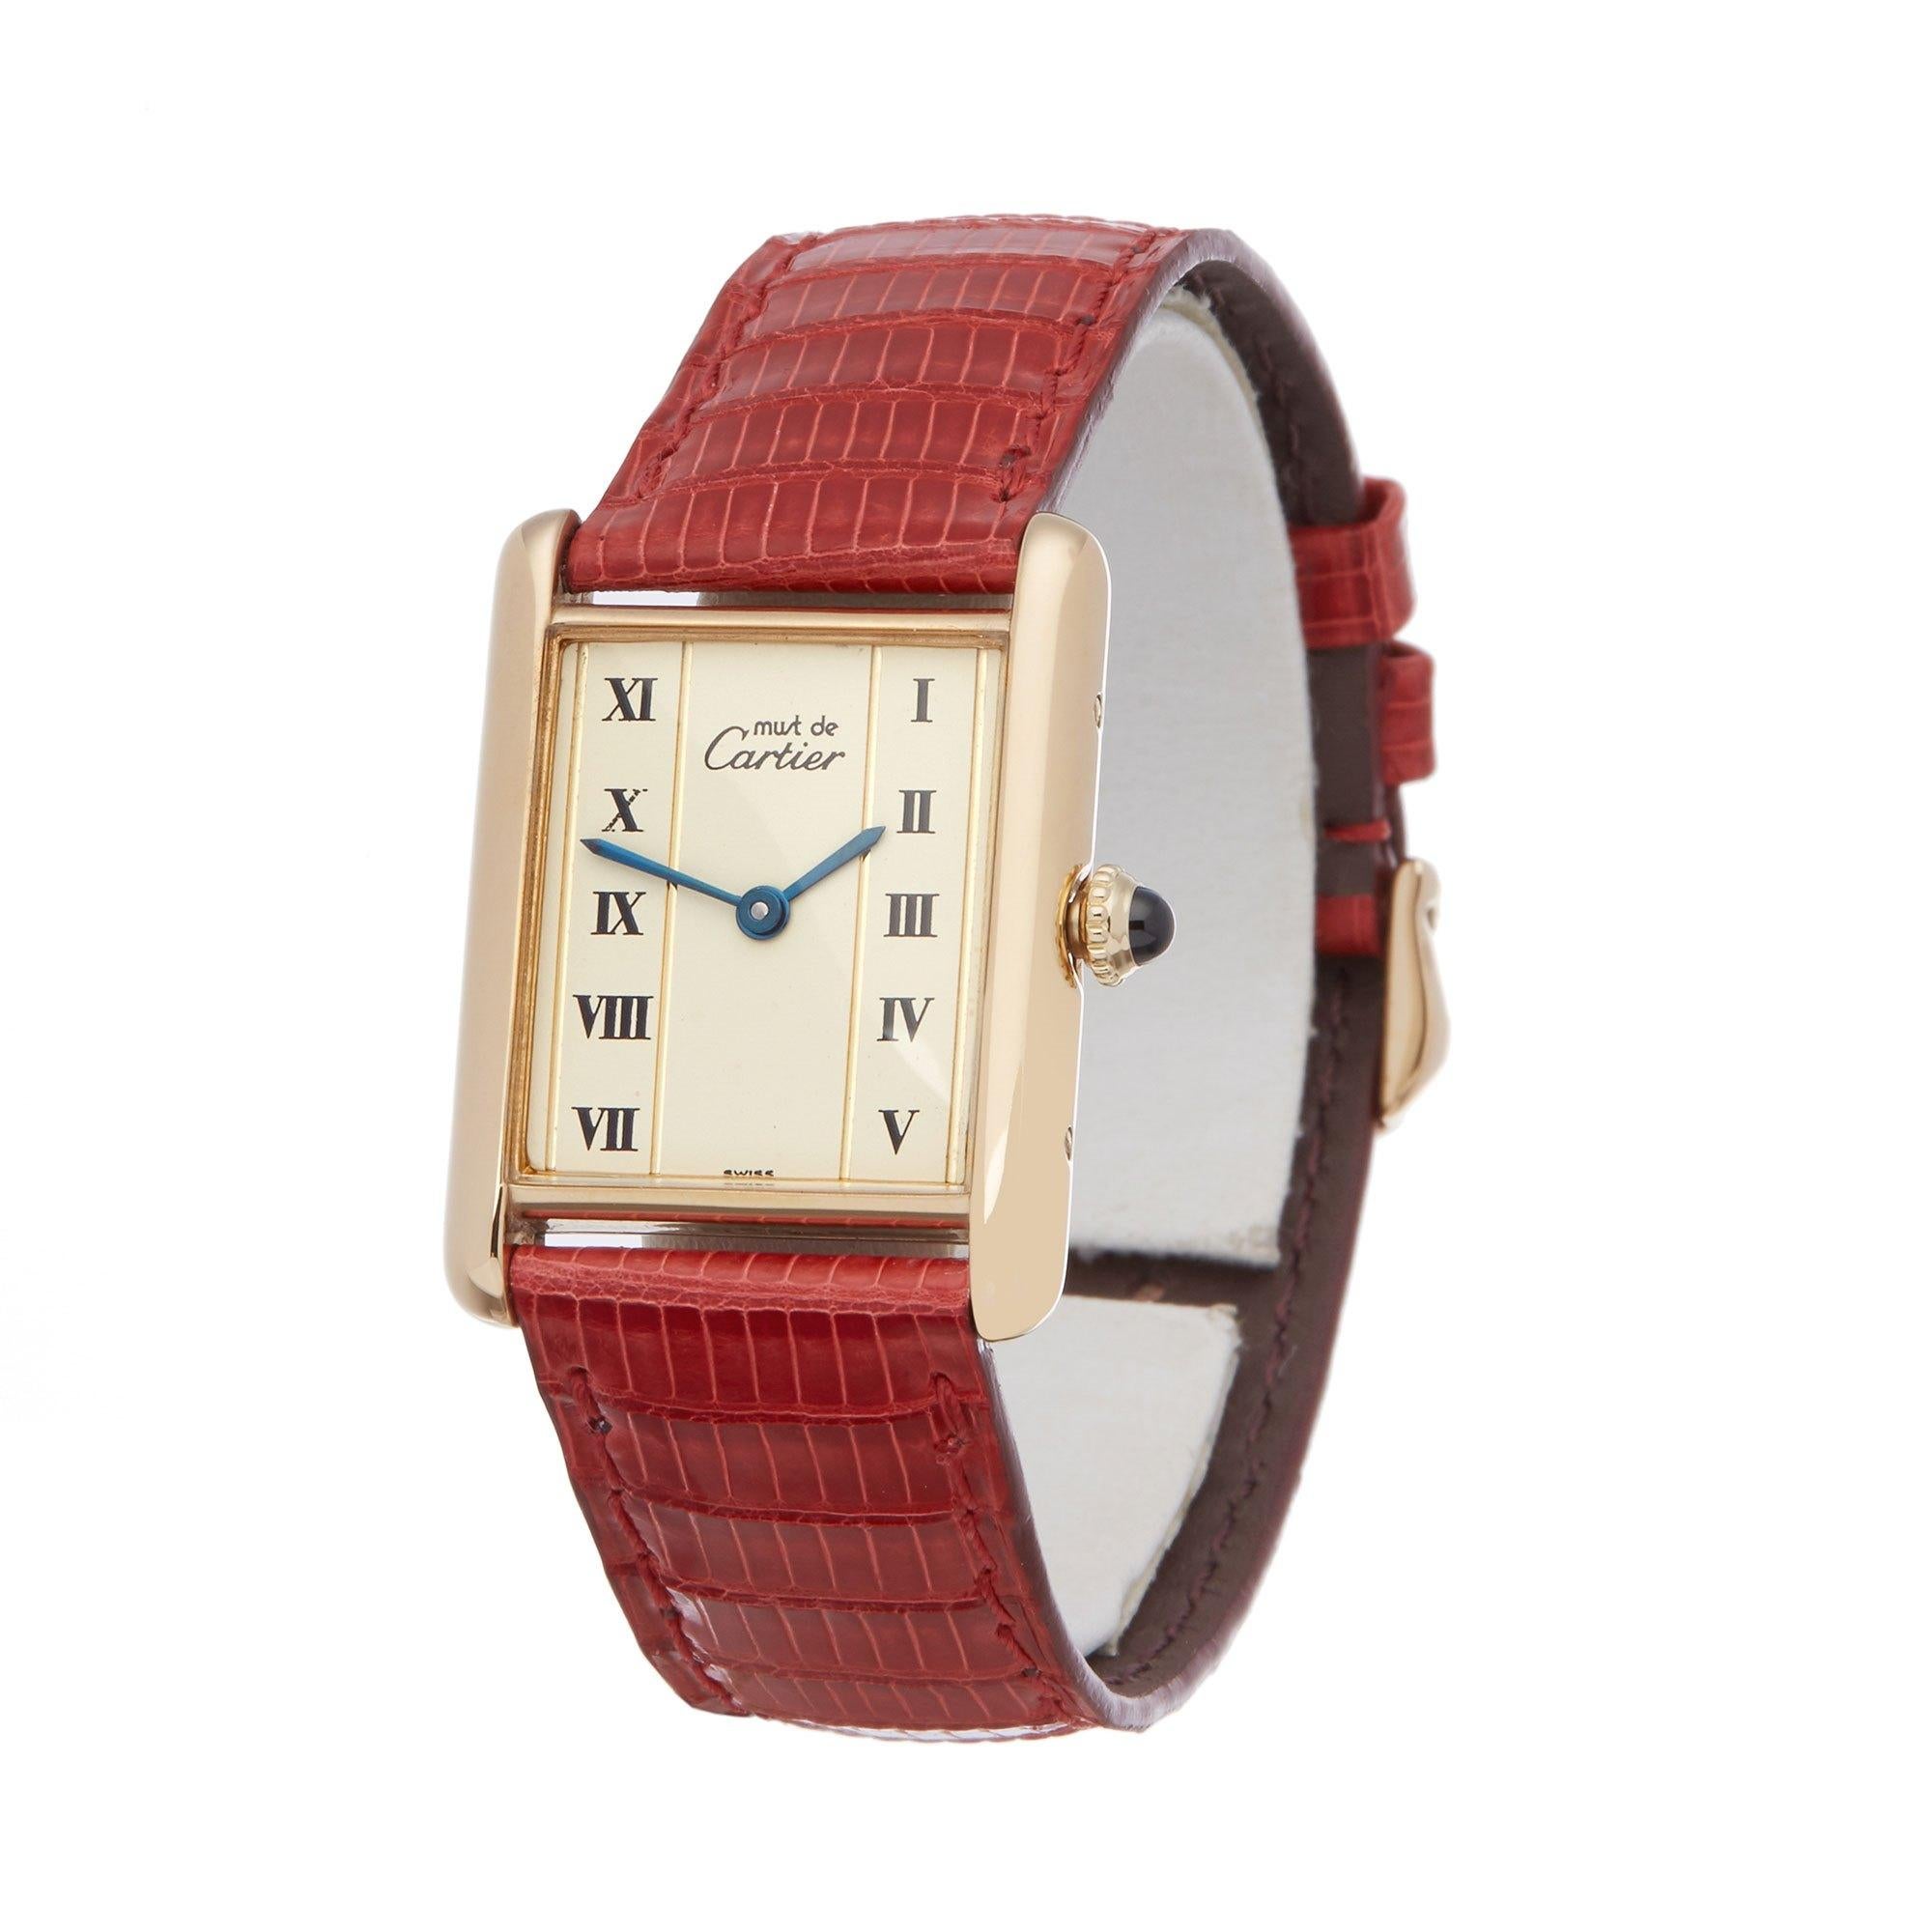 Xupes Reference: W007472
Manufacturer: Cartier
Model: Must de Cartier
Model Variant: Tank,
Model Number: 82102
Age: 1990
Gender: Ladies
Complete With: Cartier Service Pouch & Service Receipt 
Dial: White Roman
Glass: Sapphire Crystal
Case Size: 23mm